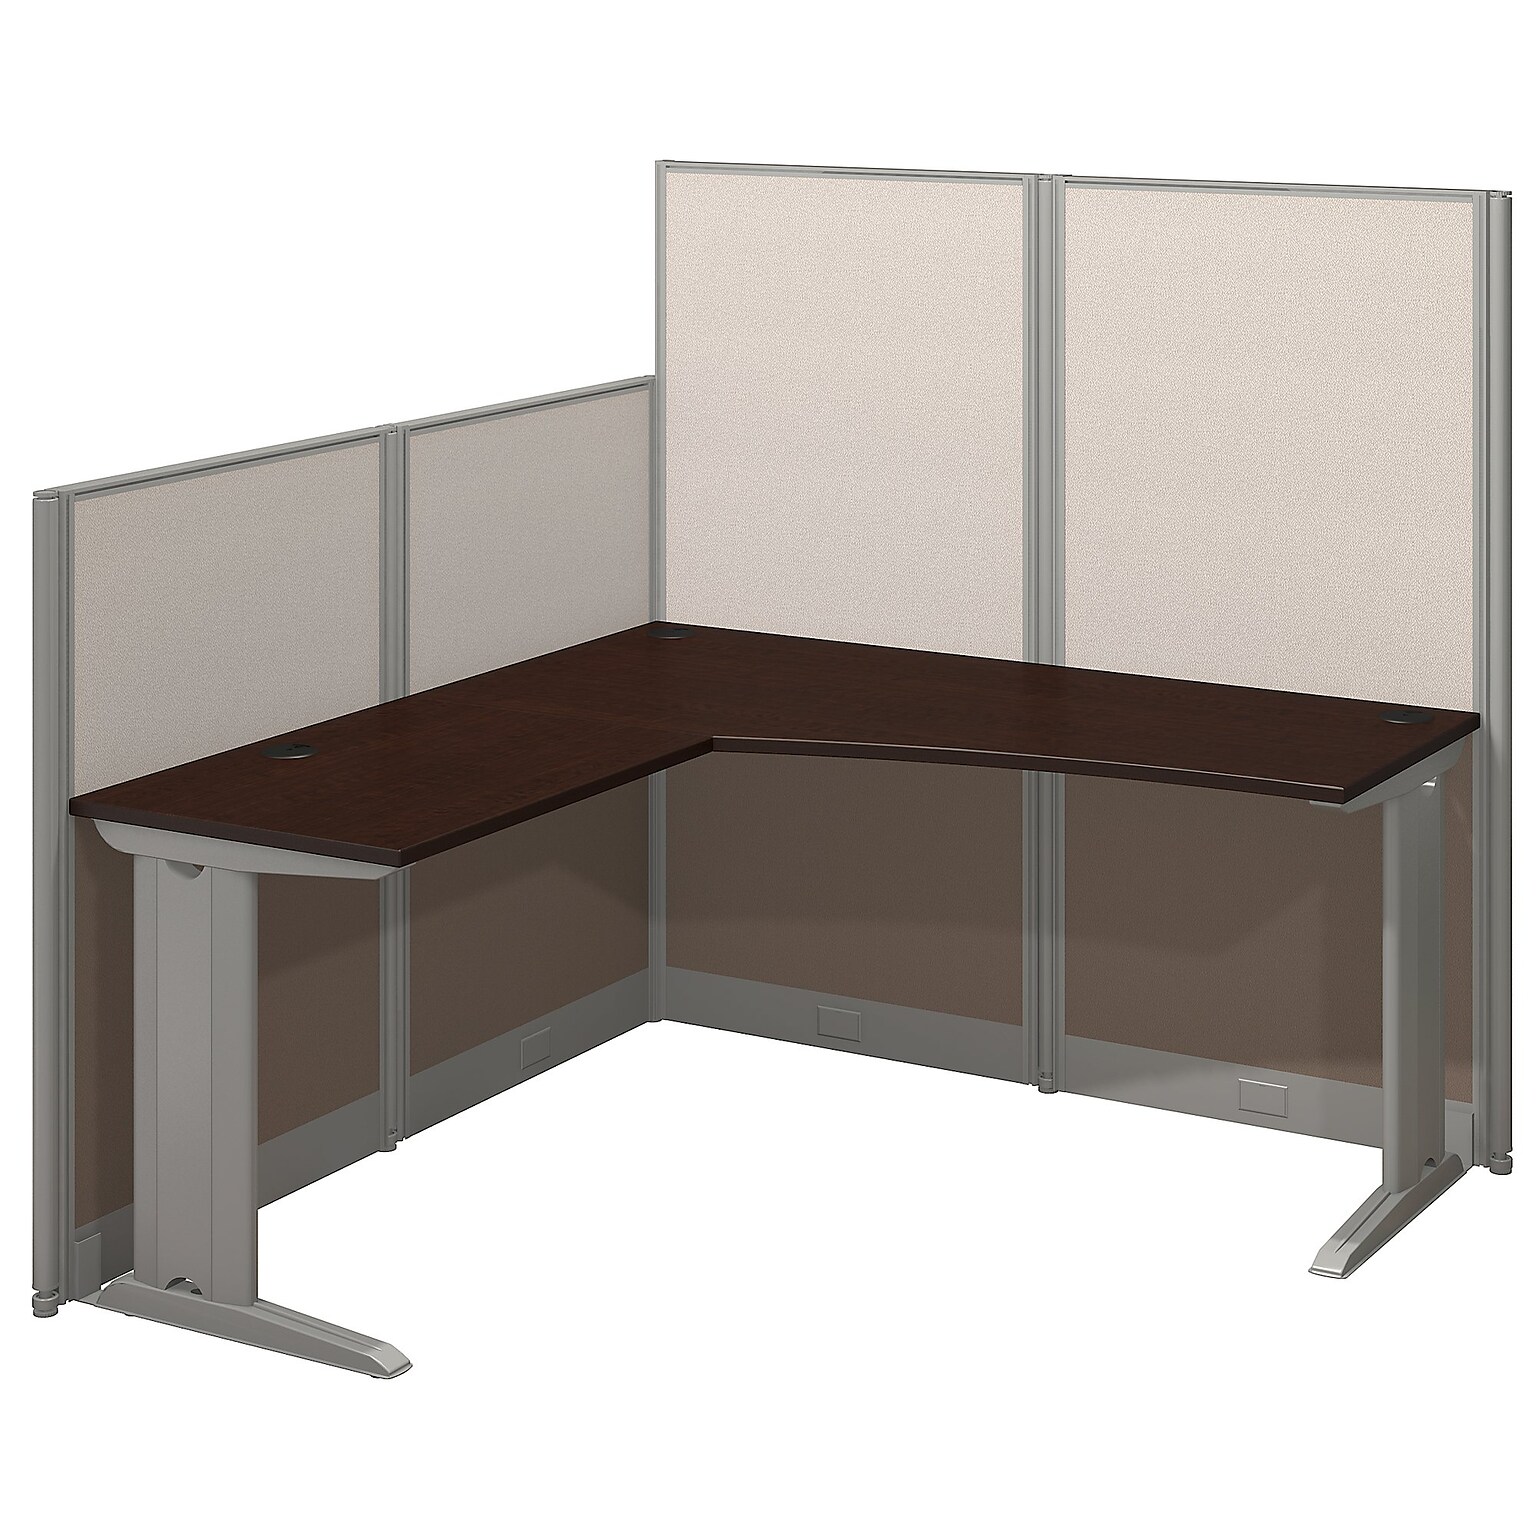 Bush Business Furniture Office in an Hour 65W x 65D L Shaped Cubicle Workstation, Mocha Cherry (WC36894-03K)